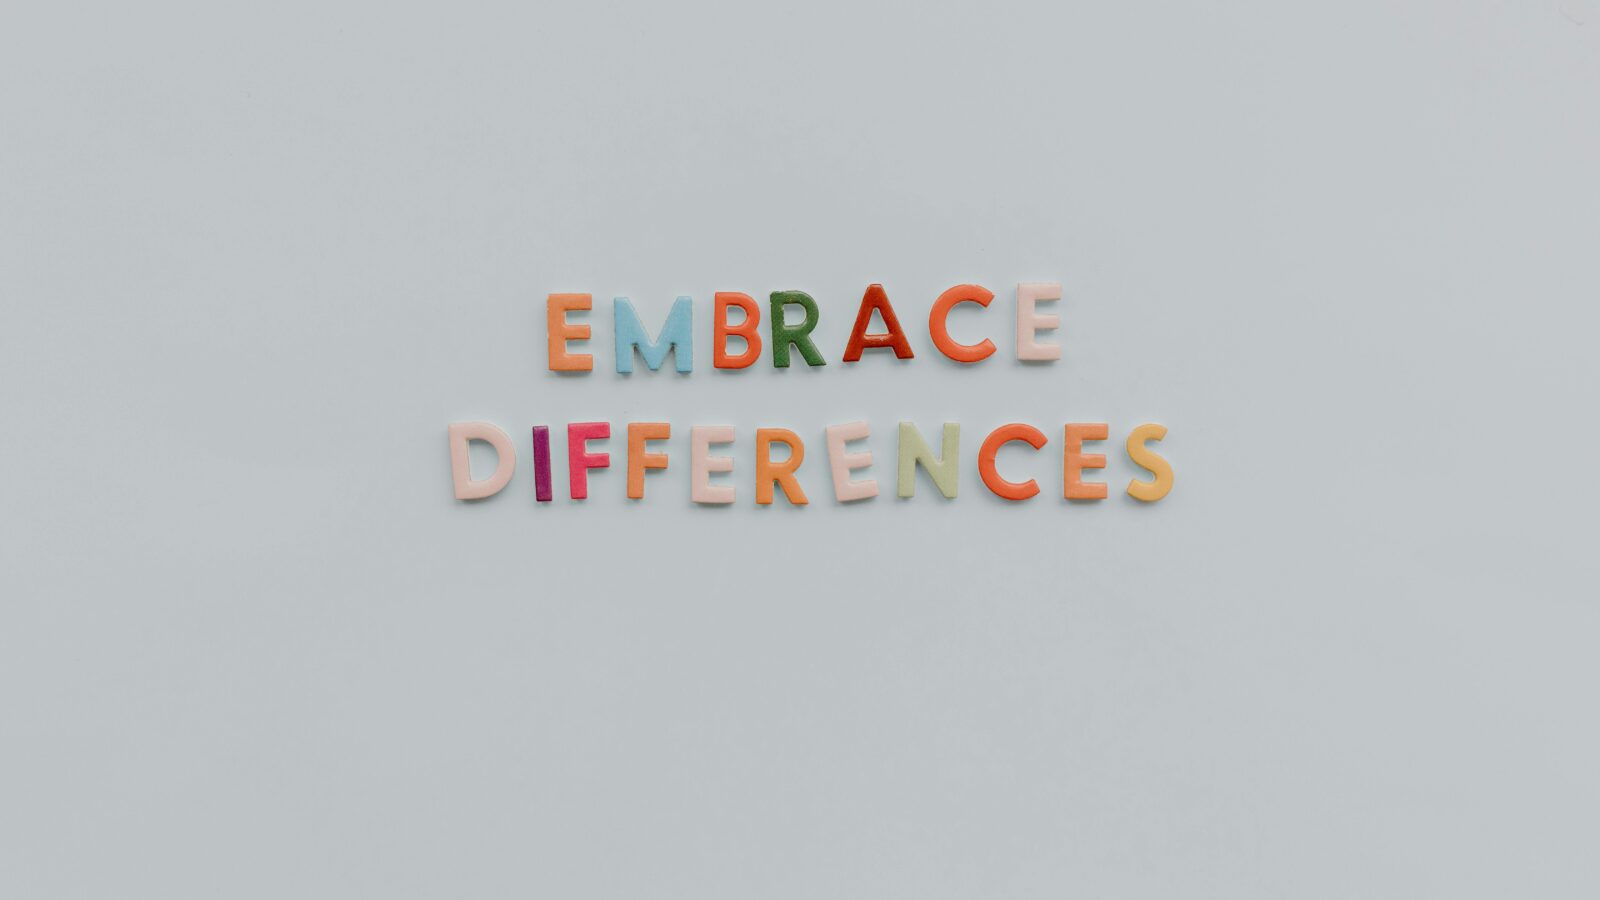 rainbow letter blocks that spell out "embrace differences" on a grey background